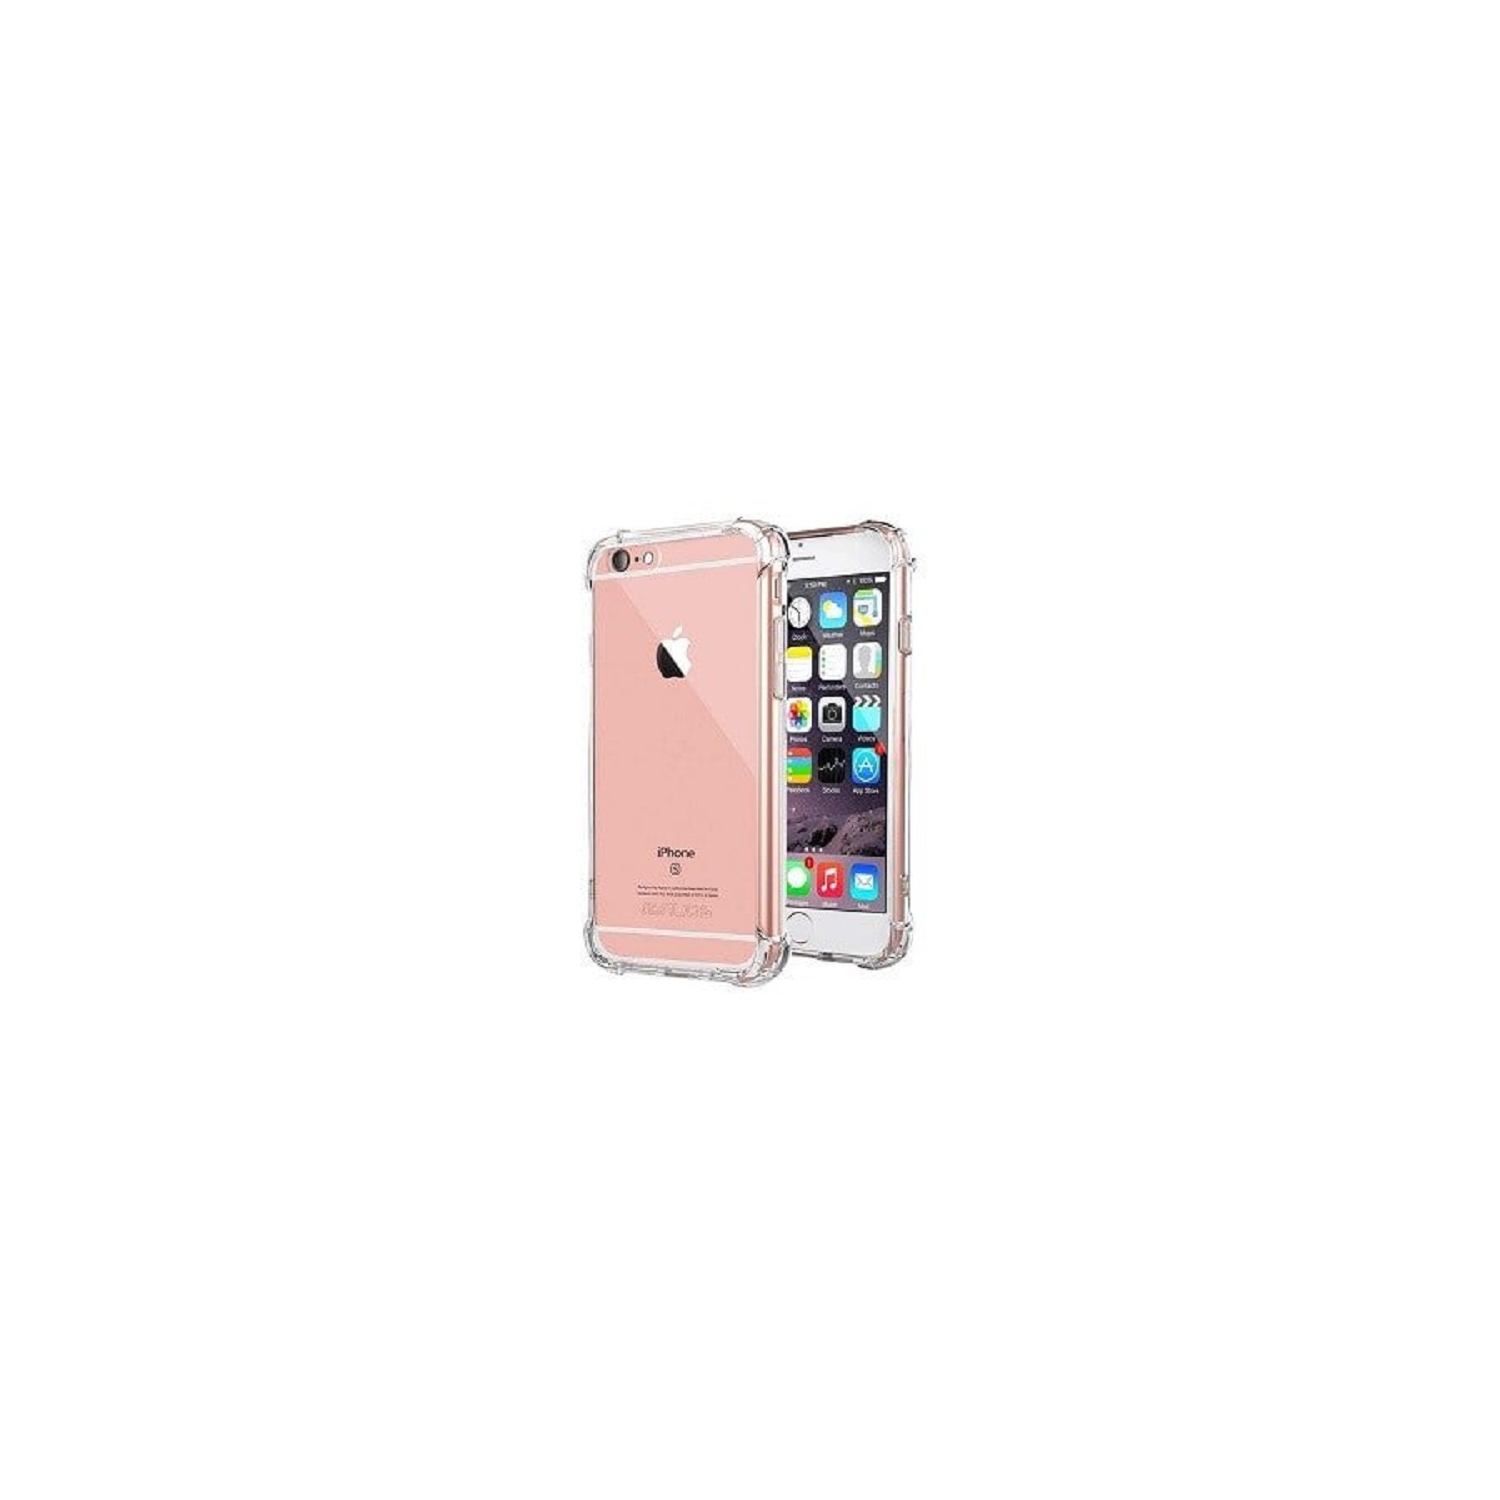 Apple iPhone 6 Plus Clear Case Shockproof Tough Gel Transparent Anti knock Air Cushion Heavy Duty Phone Back Cover